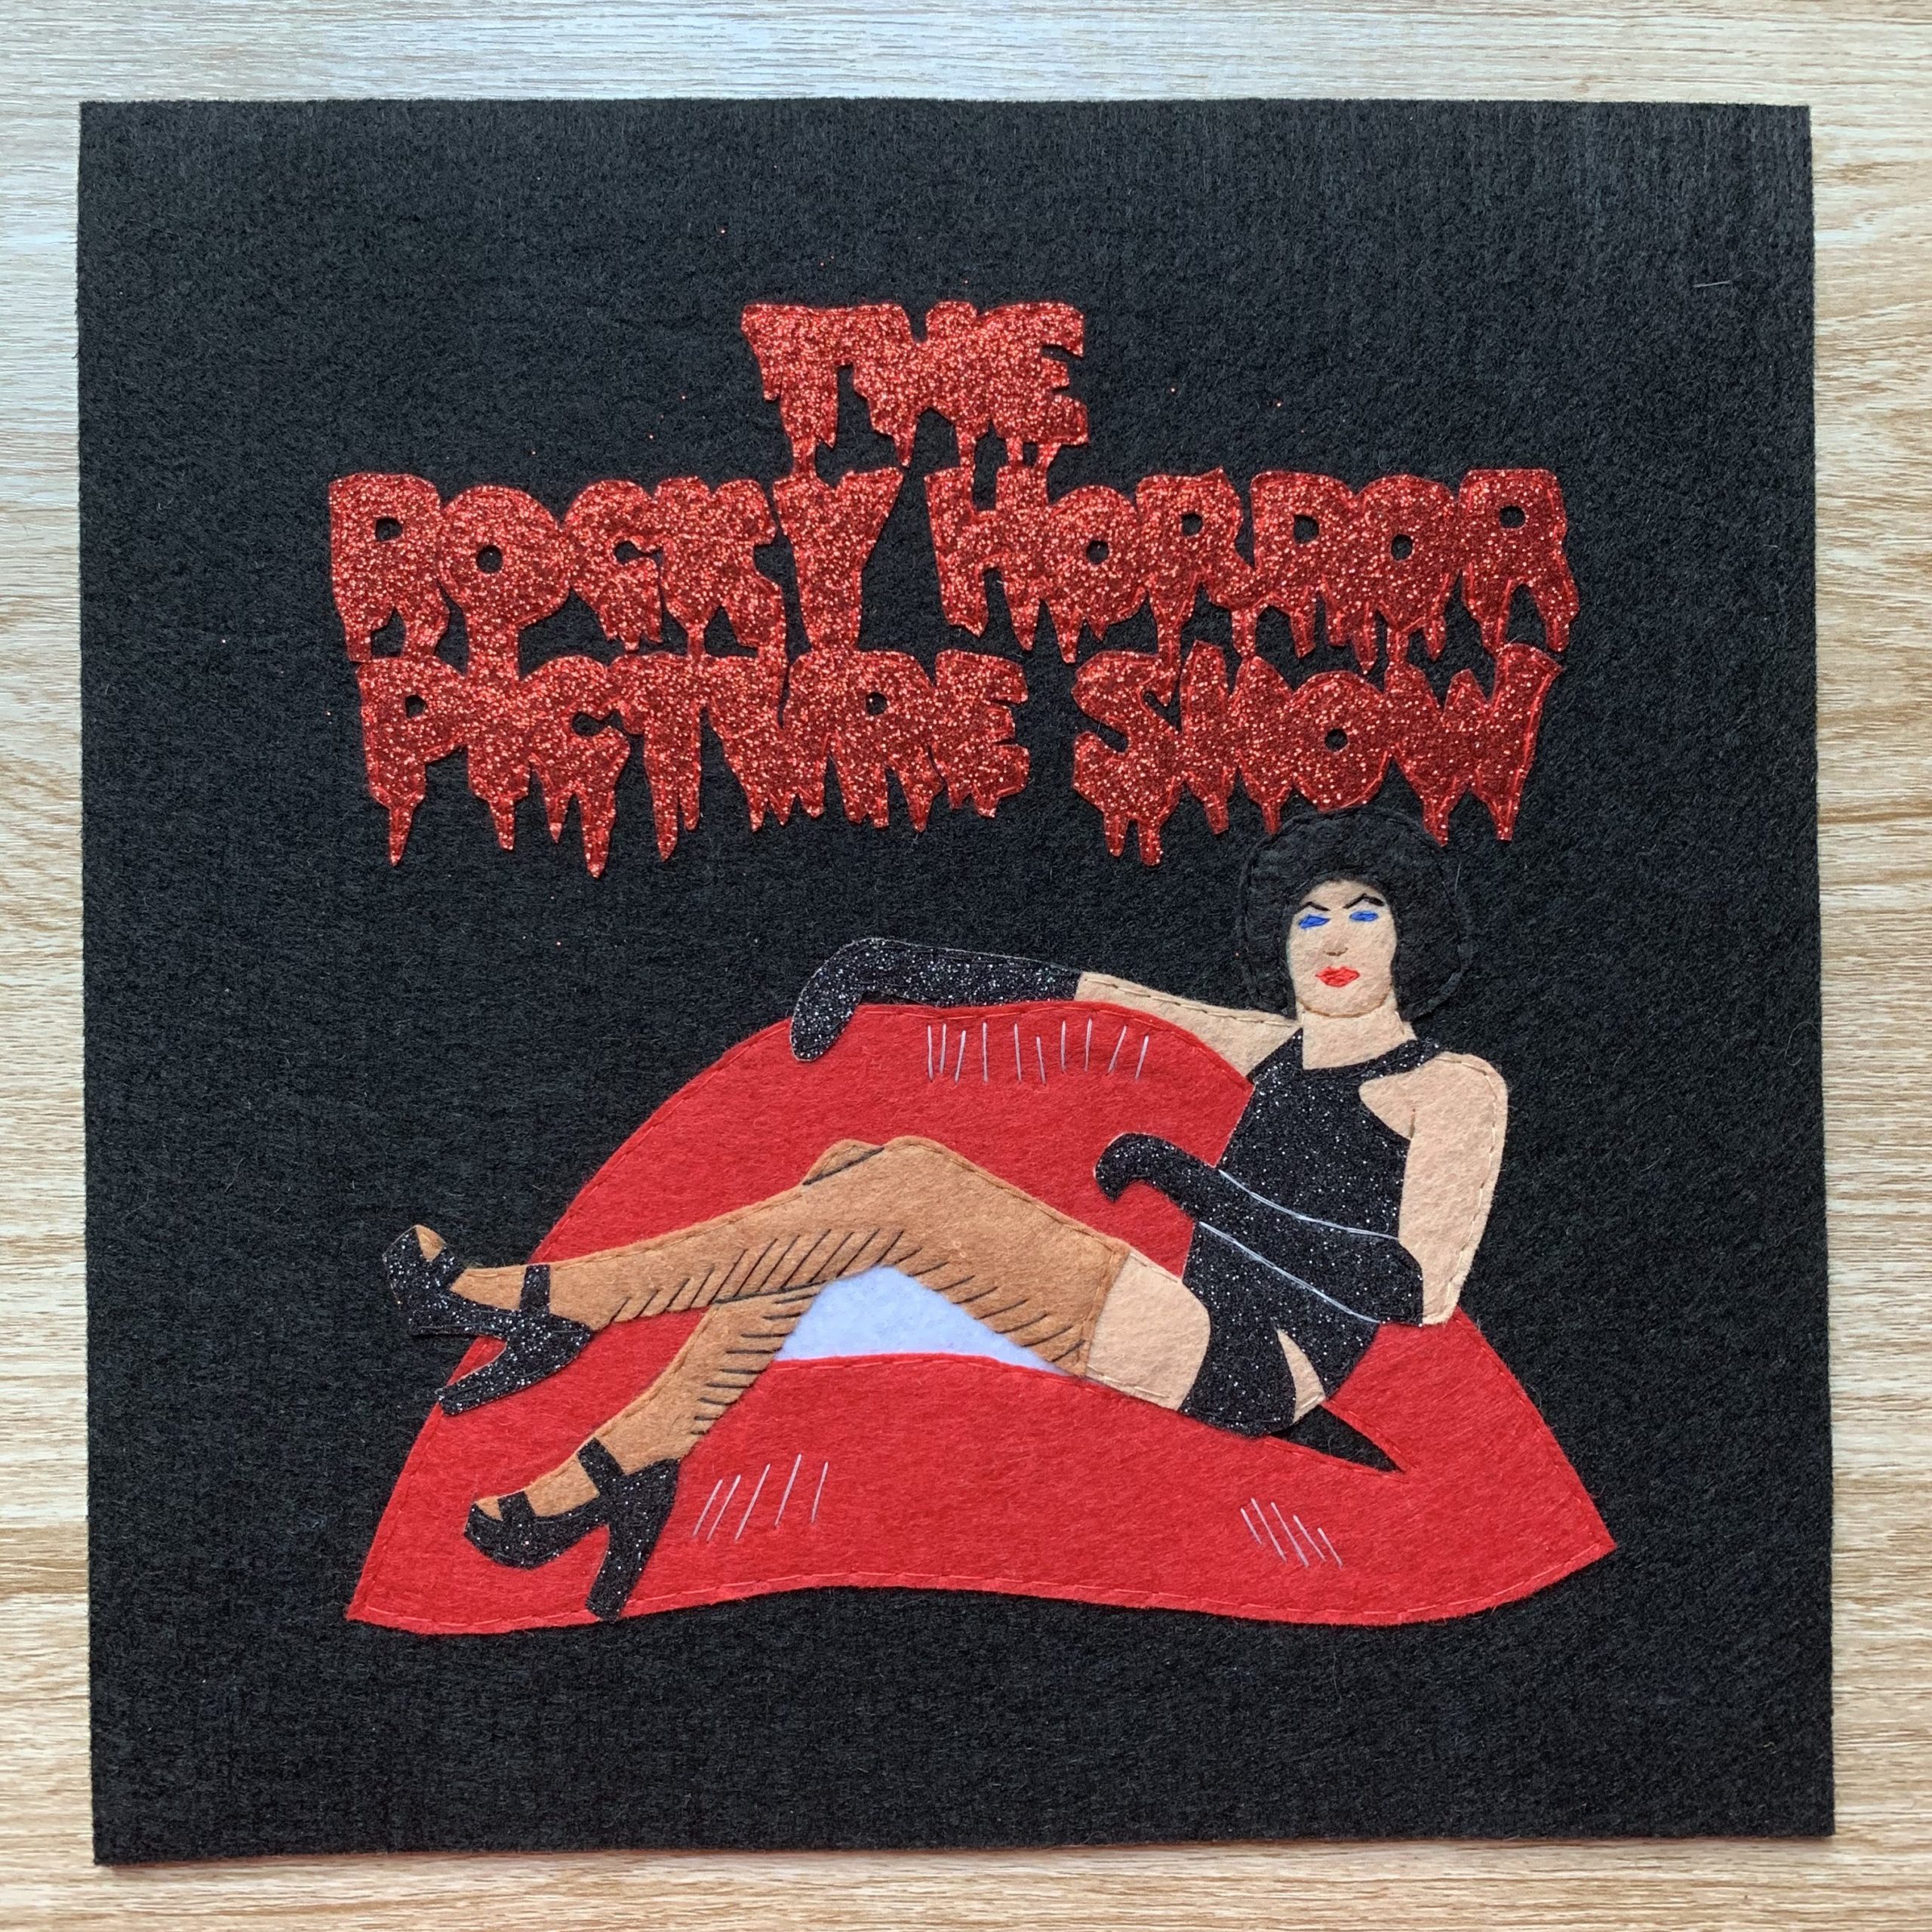 Rocky Horror Picture Show – OST (1975)